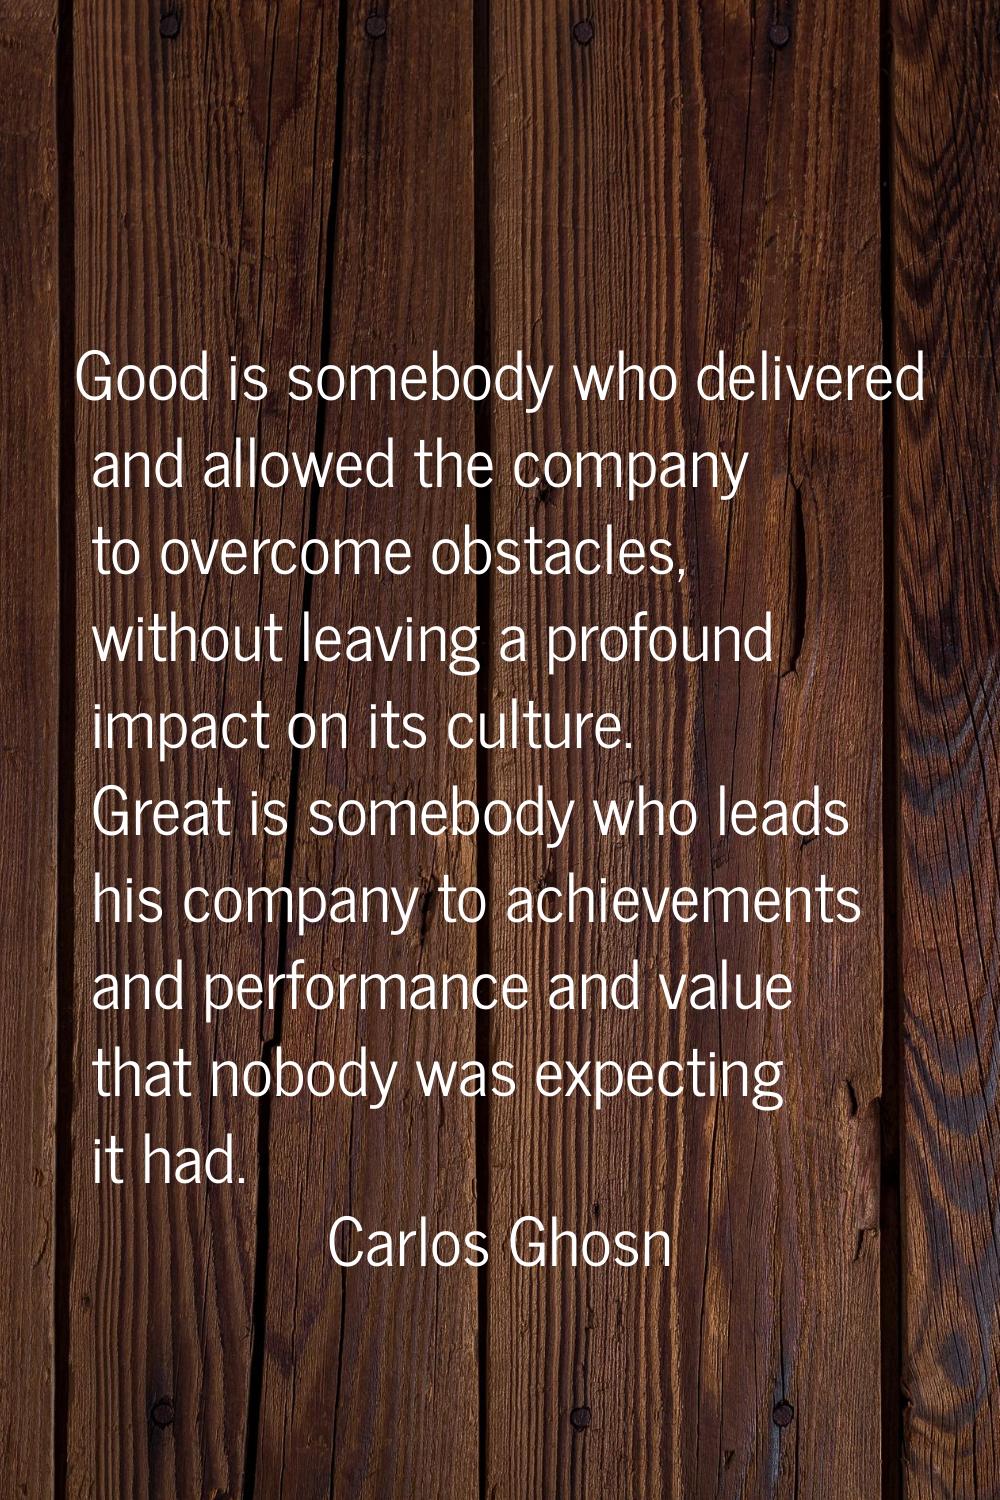 Good is somebody who delivered and allowed the company to overcome obstacles, without leaving a pro